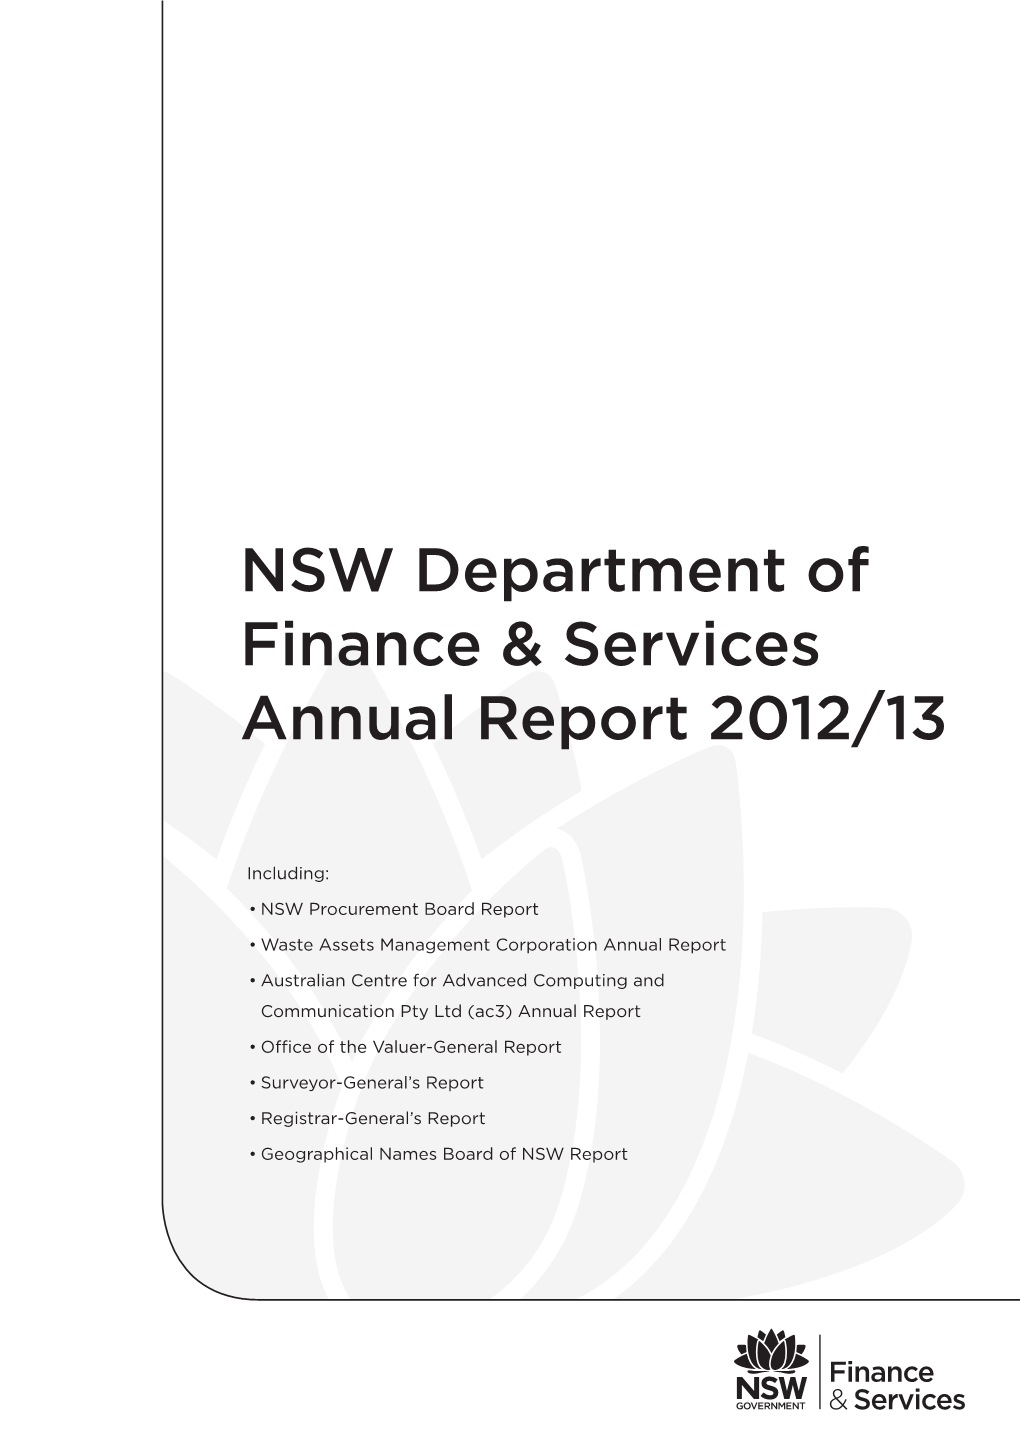 NSW Department of Finance & Services Annual Report 2012/13